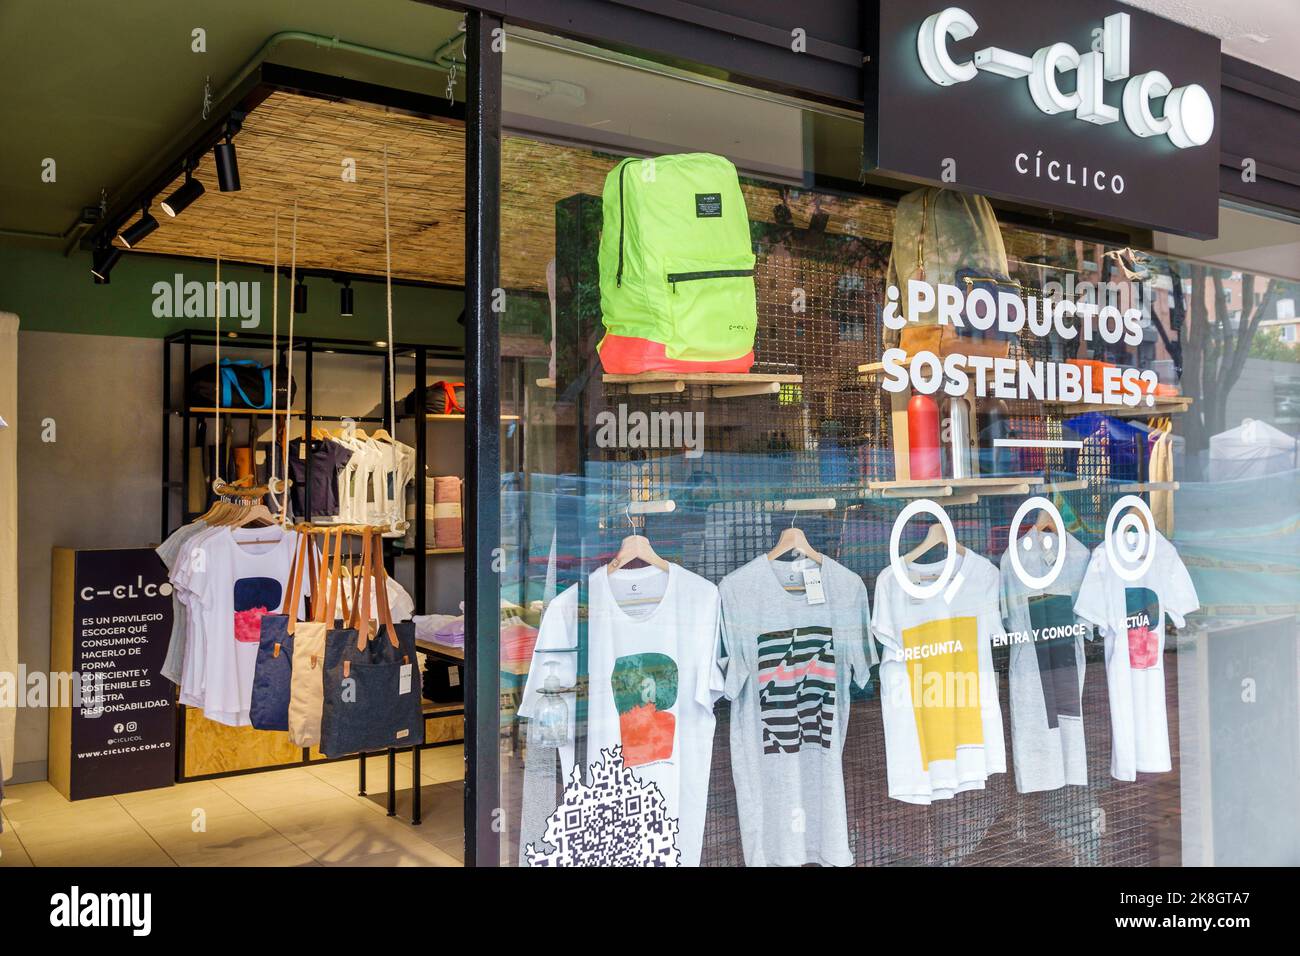 Bogota Colombia,El Chico Calle 94,sustainable sustainability products clothing C-Clico Ciclico store stores business businesses shop shops market mark Stock Photo